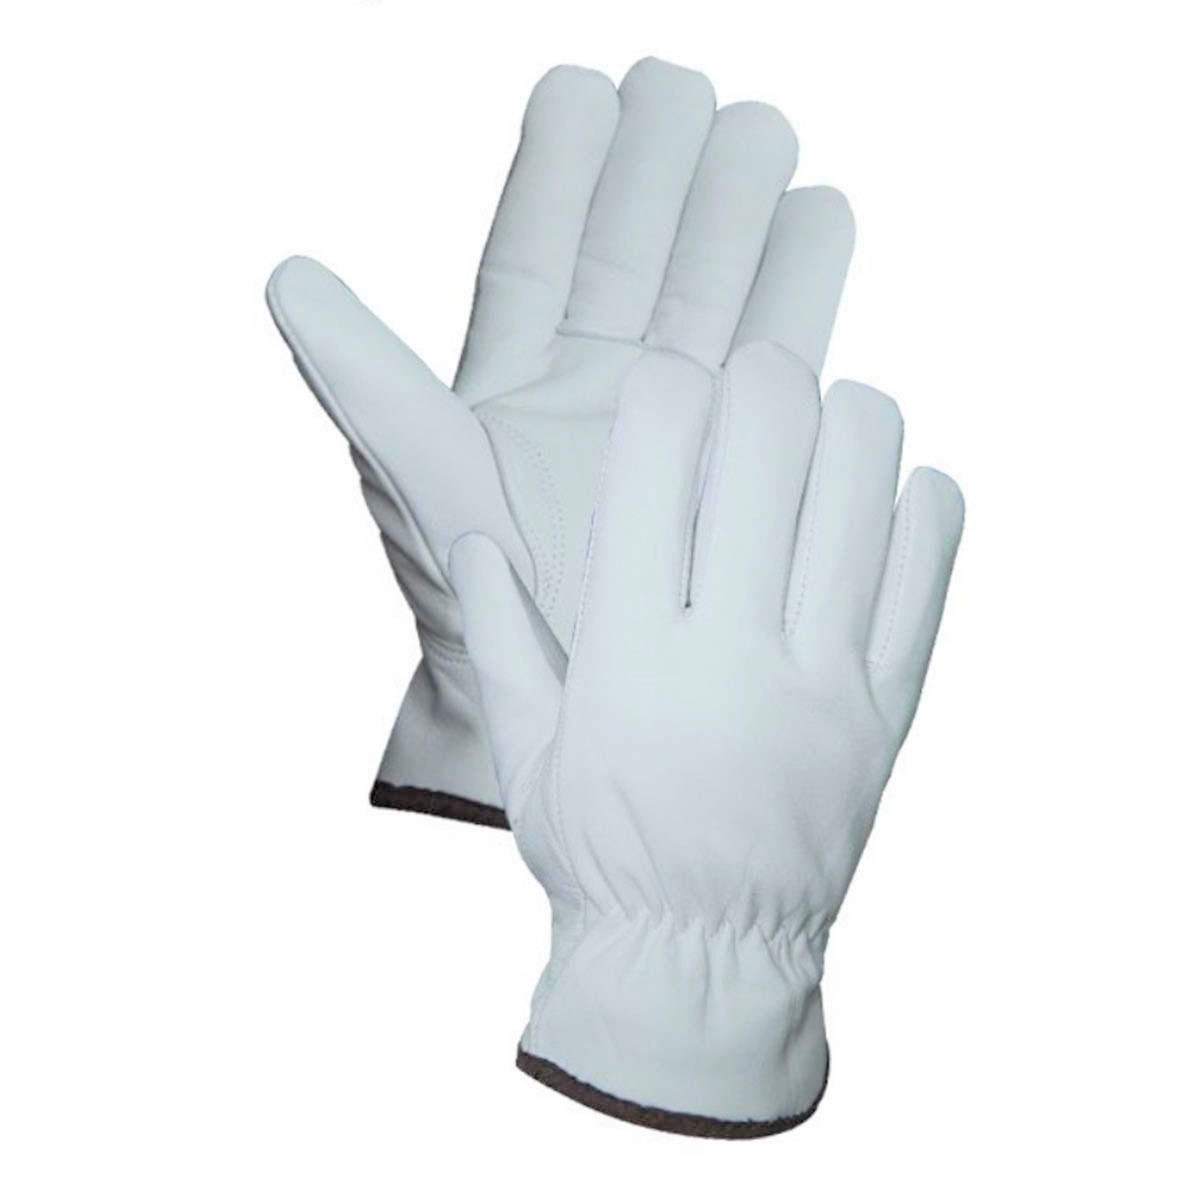 Unlined Grain Leather Drivers Gloves with Keystone Thumb